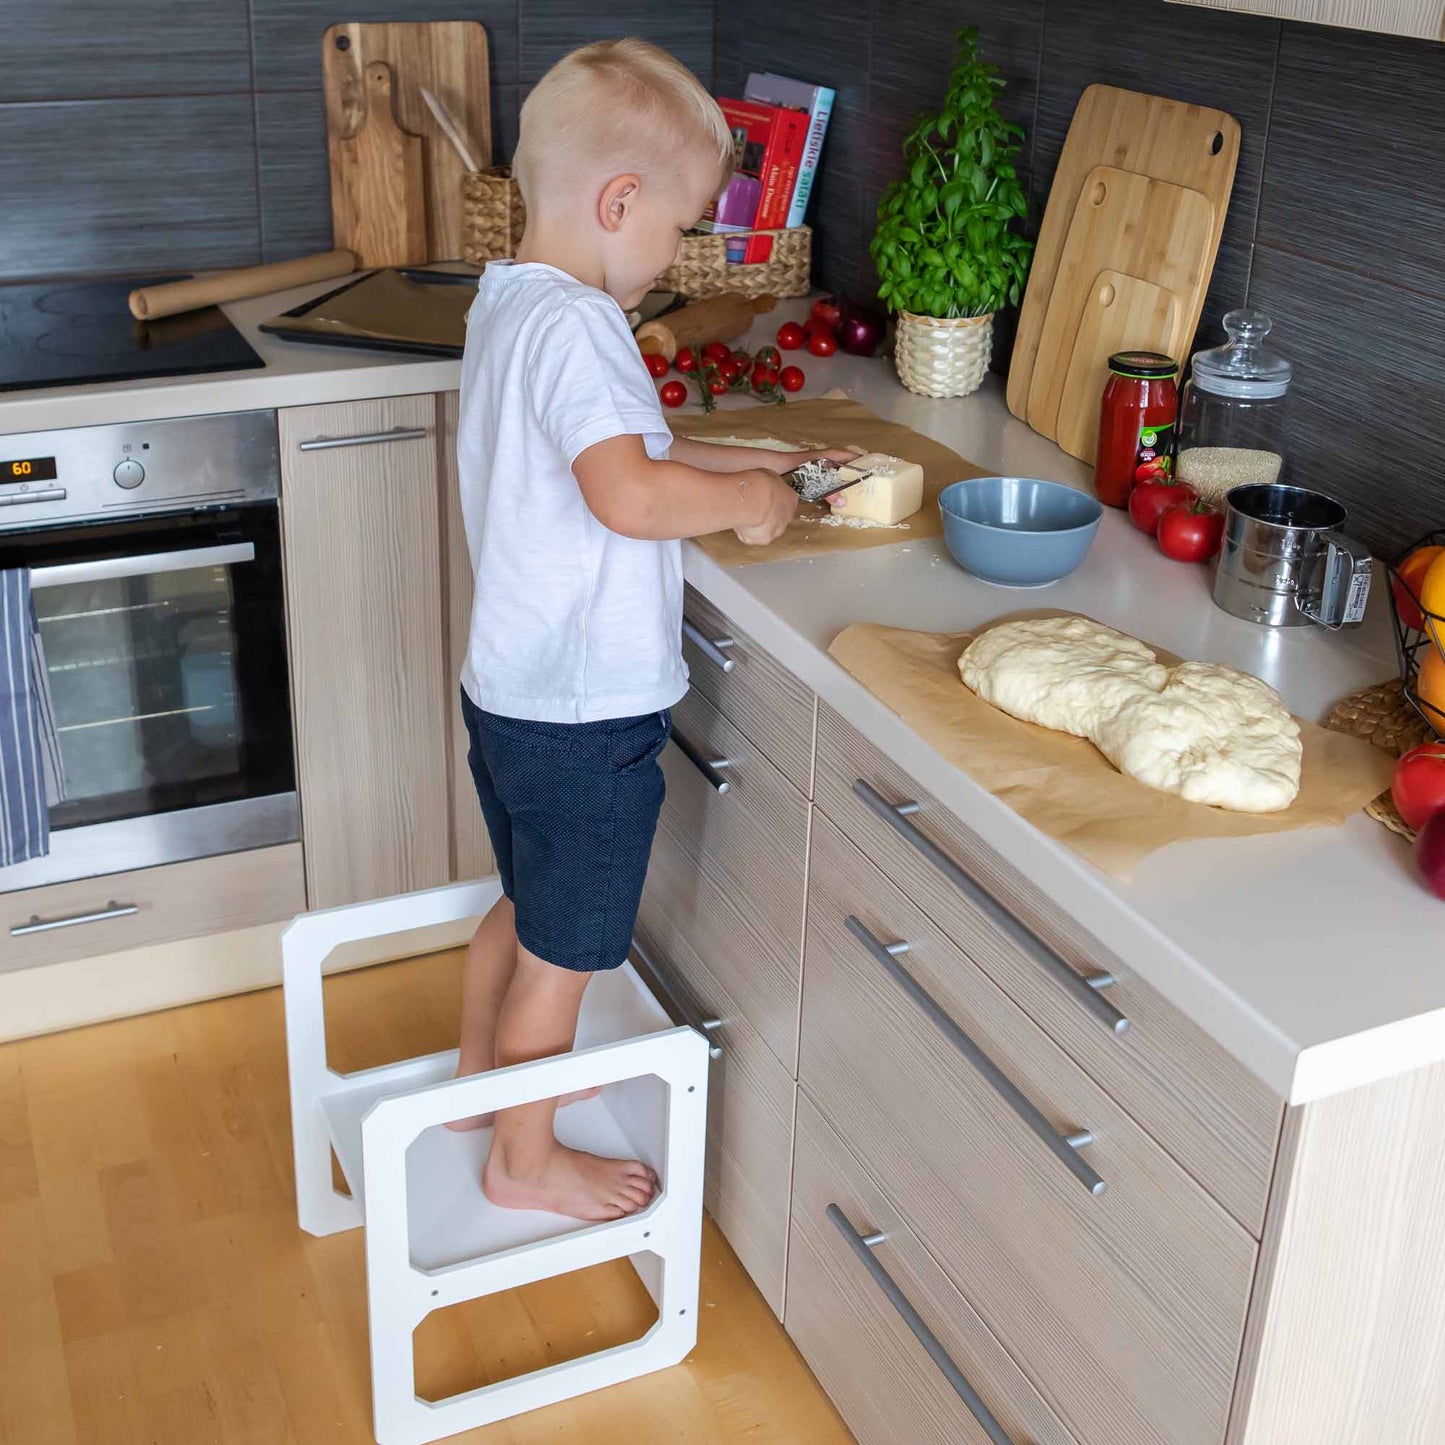 A young child sits at the Montessori weaning table and 2 chair set in a kitchen, independently cutting bread on the table next to dough and various kitchen items, showcasing fine motor skill development and fostering toddler independence.